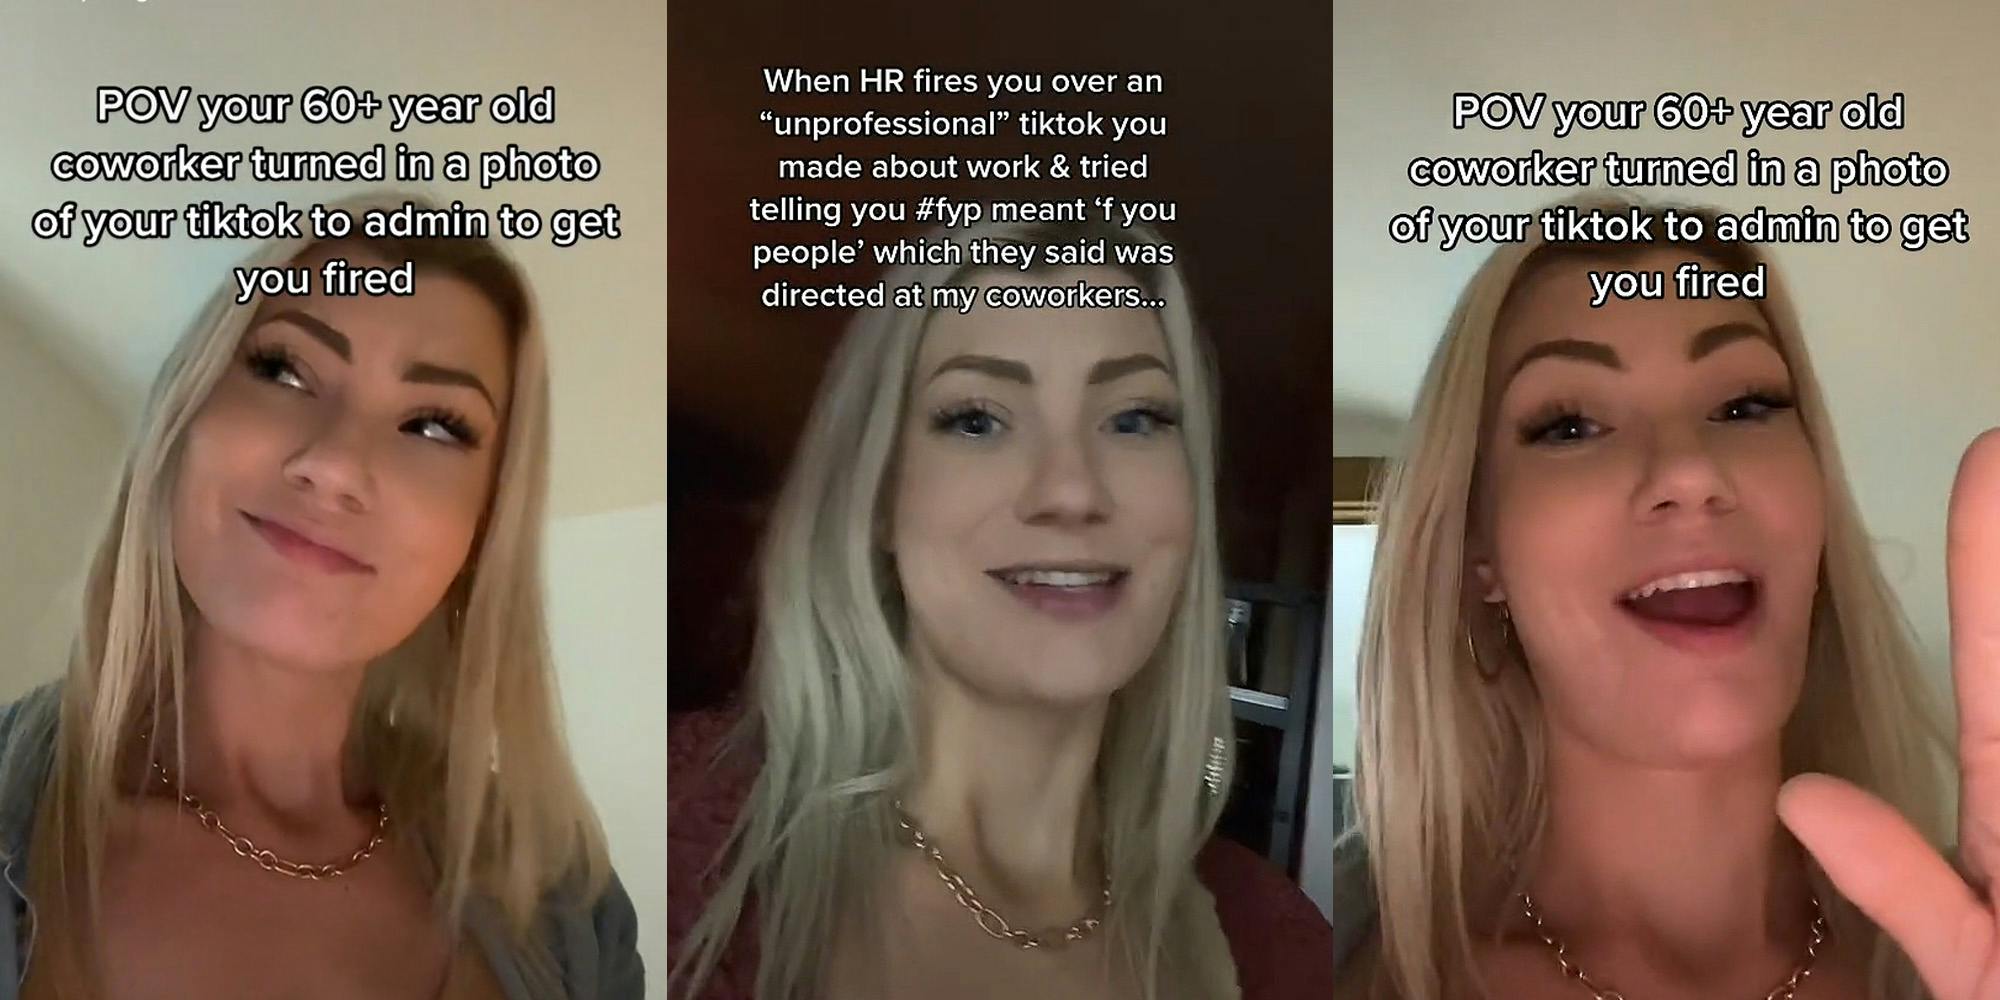 woman looking up to left caption "POV your 60+ year old coworker turned in a photo of your tiktok to admin to get you fired" (l) woman speaking caption "When HR fires you over an "unprofessional" tiktok you made about work & tried telling you #fyp meant 'f you people' which they said was directed at my coworkers..." (c) woman speaking hand up caption "POV your 60+ year old coworker turned in a photo of your tiktok to admin to get you fired" (r)